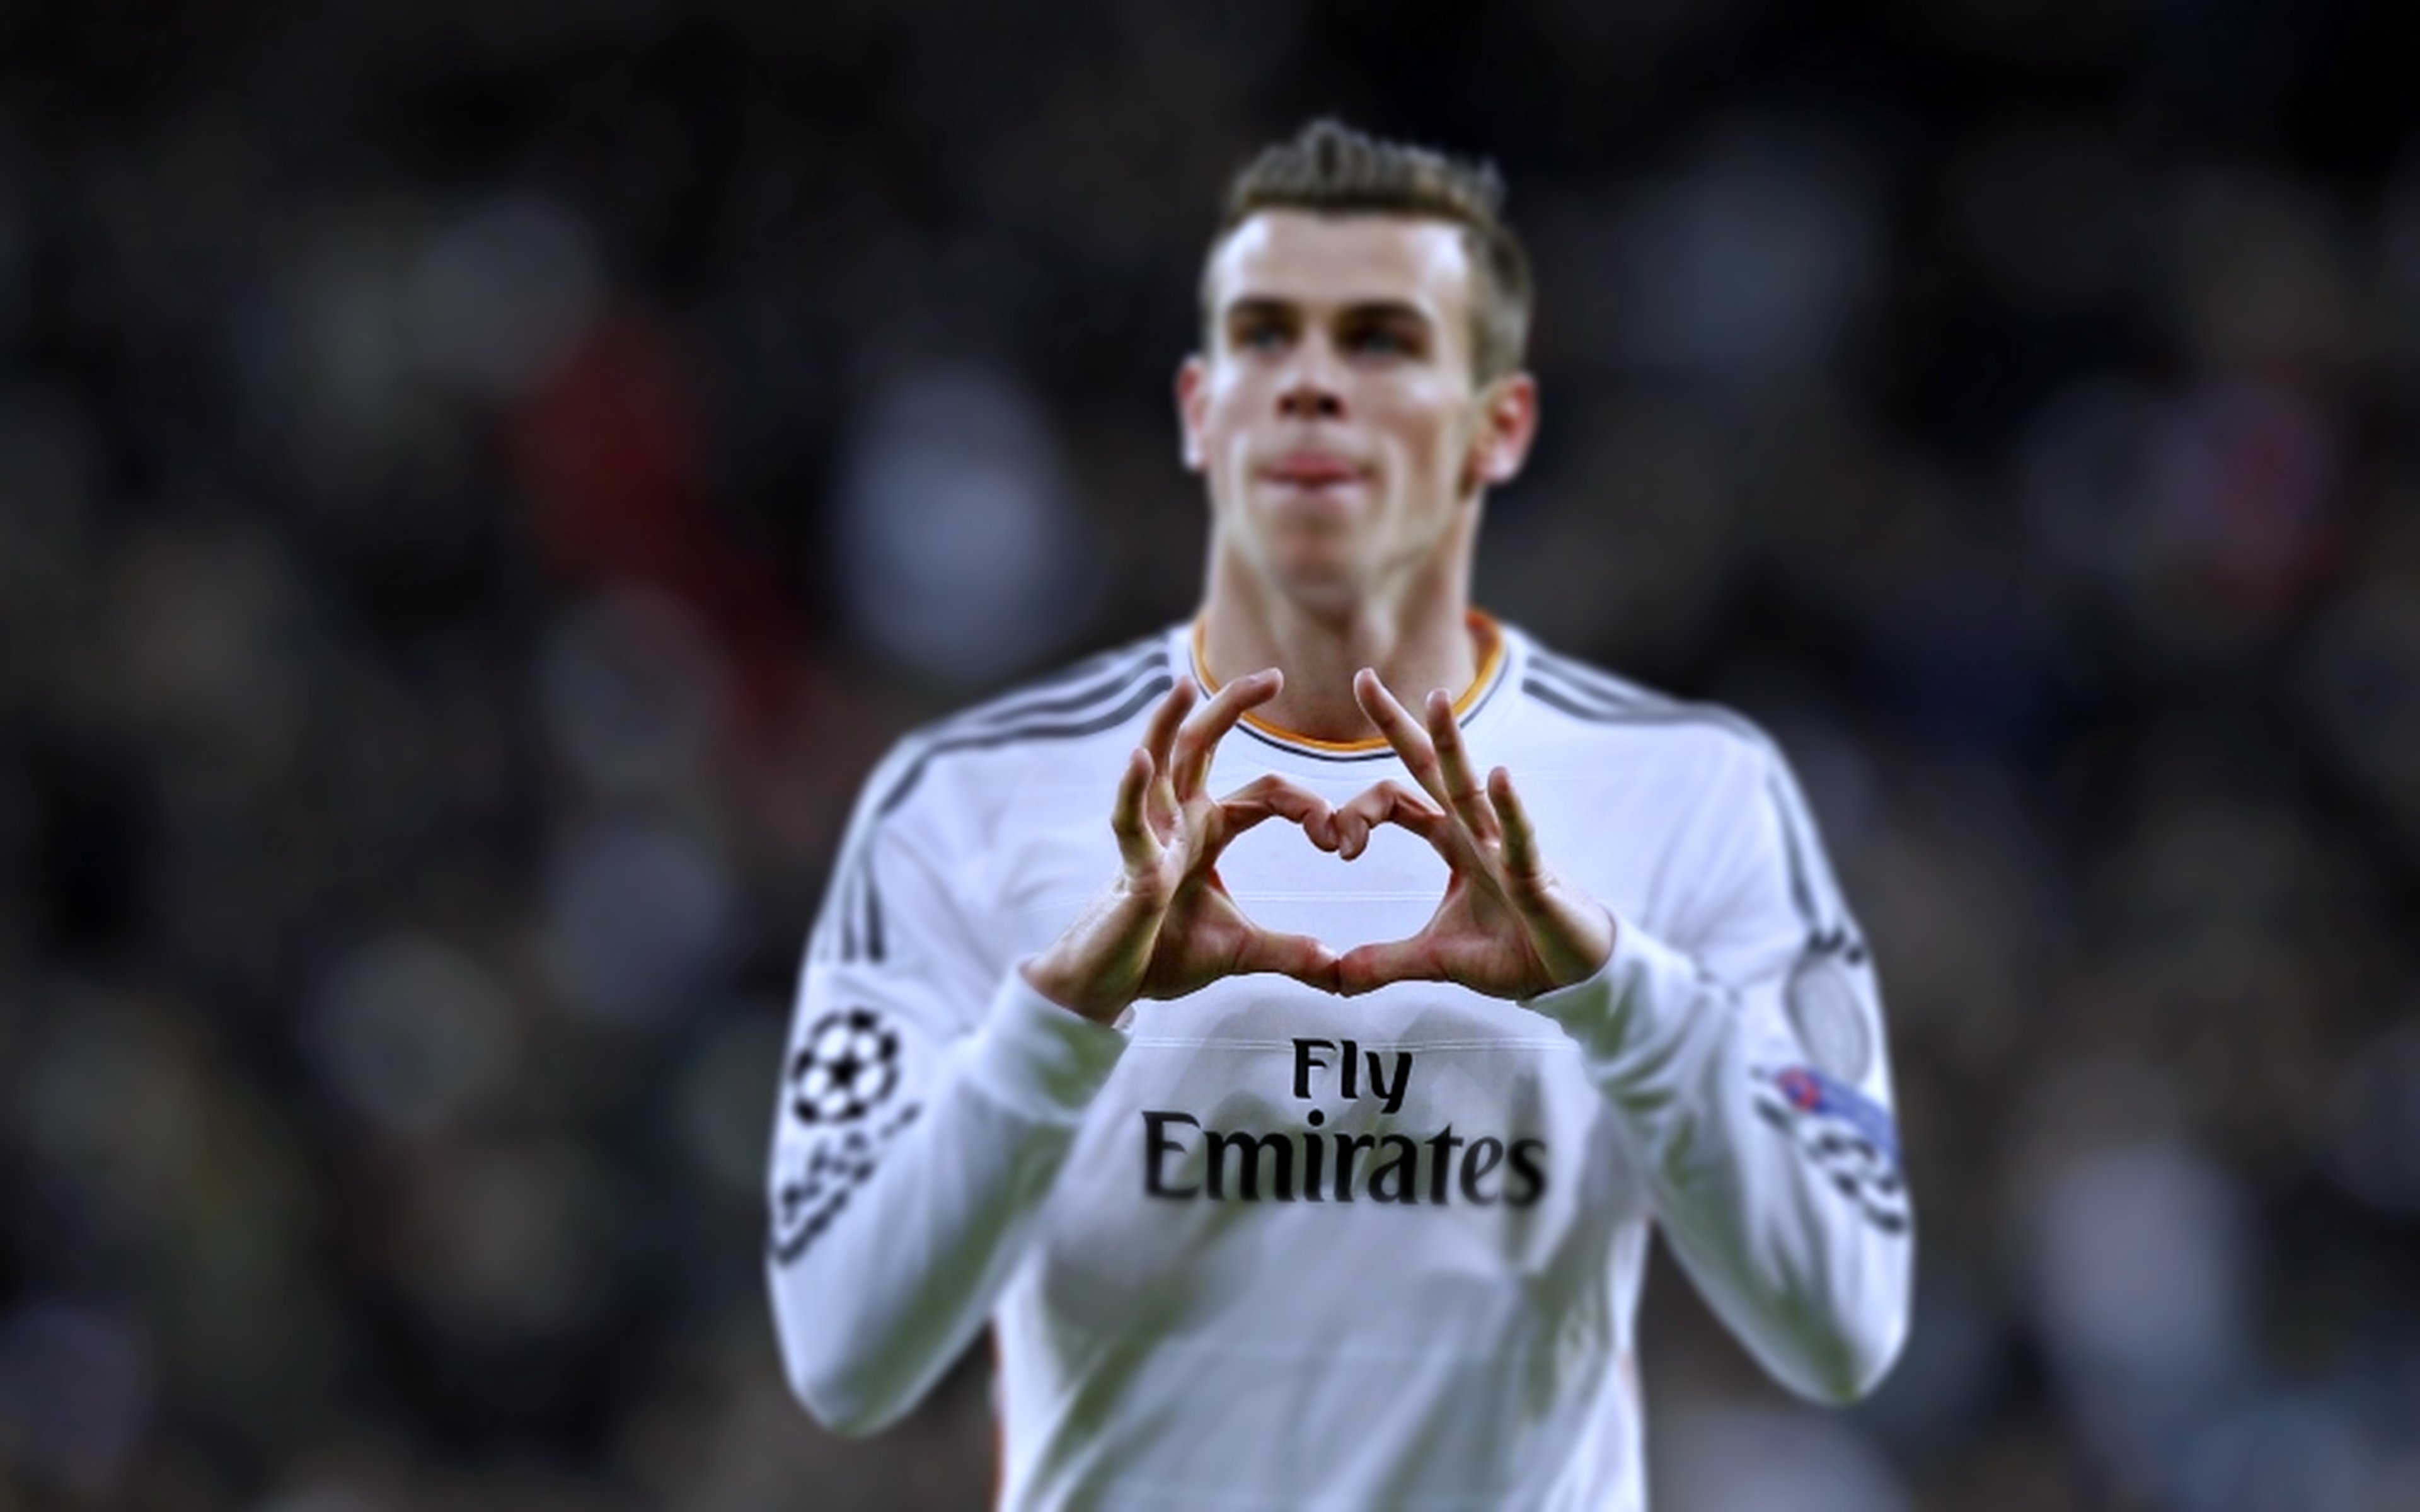 gareth, Bale, Champions, League, Real, Madrid, Fly, Emirates, Football, Sports, 11 Wallpaper